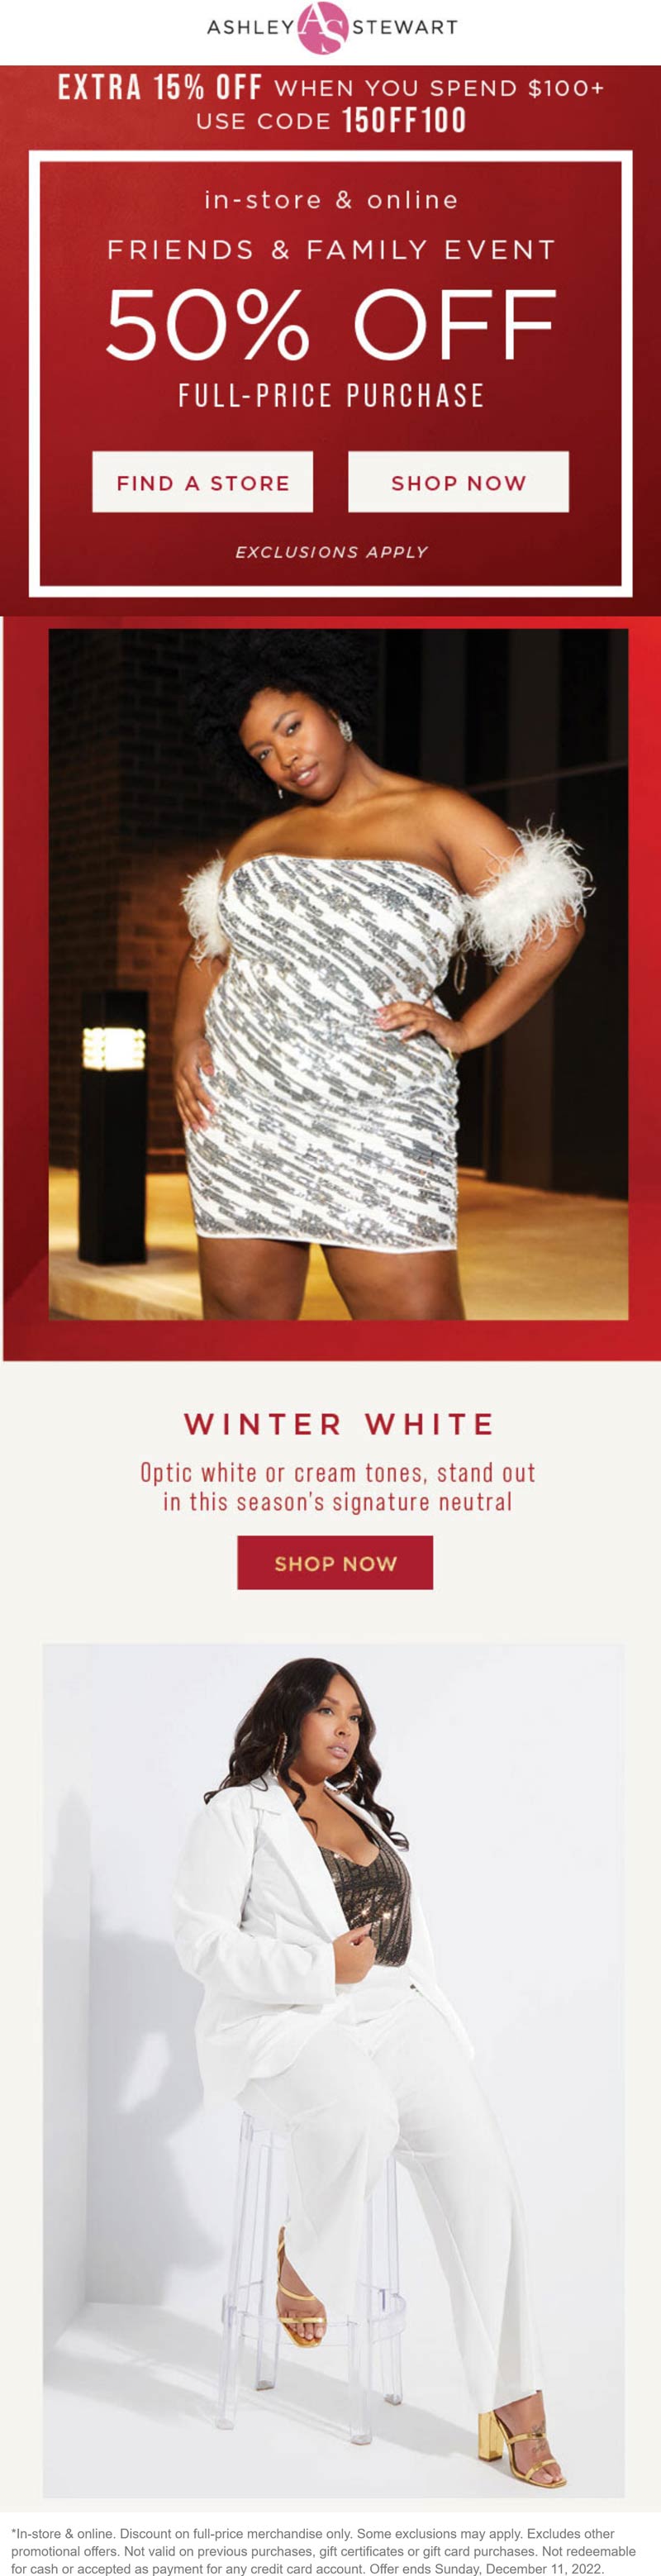 Ashley Stewart stores Coupon  50% off & more today at Ashley Stewart, ditto online #ashleystewart 